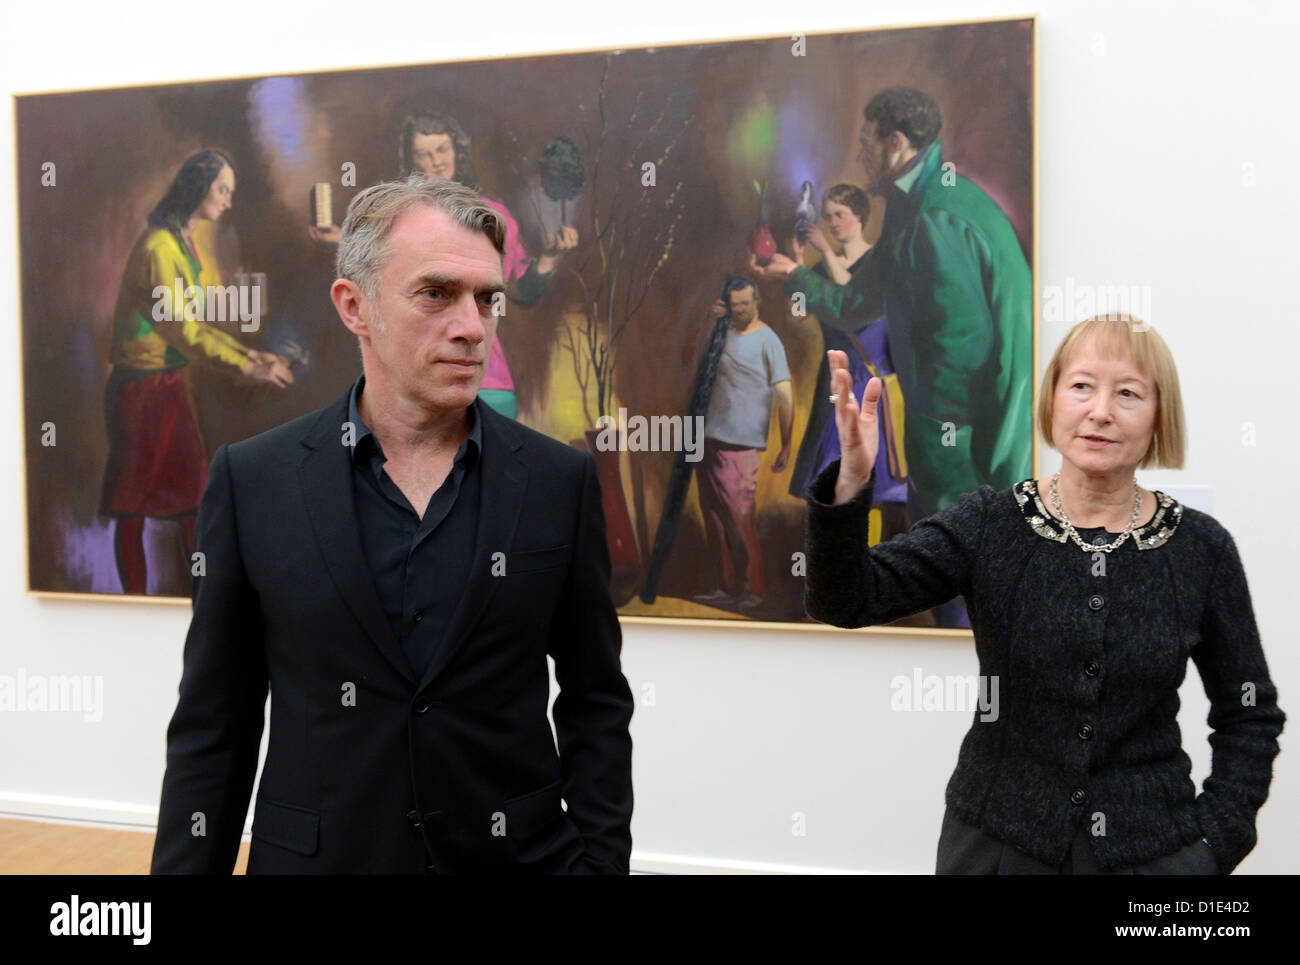 Artist Neo Rauch from Leipzig and Director-General of the Art collection Chemnitz Ingrid Moessinger stand in front of Rauch's painting 'Die Abwaegung' in Chemnitz, Germany, 14 December 2012. Rauch and his wife Rosa Loy exhibit together for the first time, with a total of 23 art works. Photo: Hendrik Schmidt Stock Photo